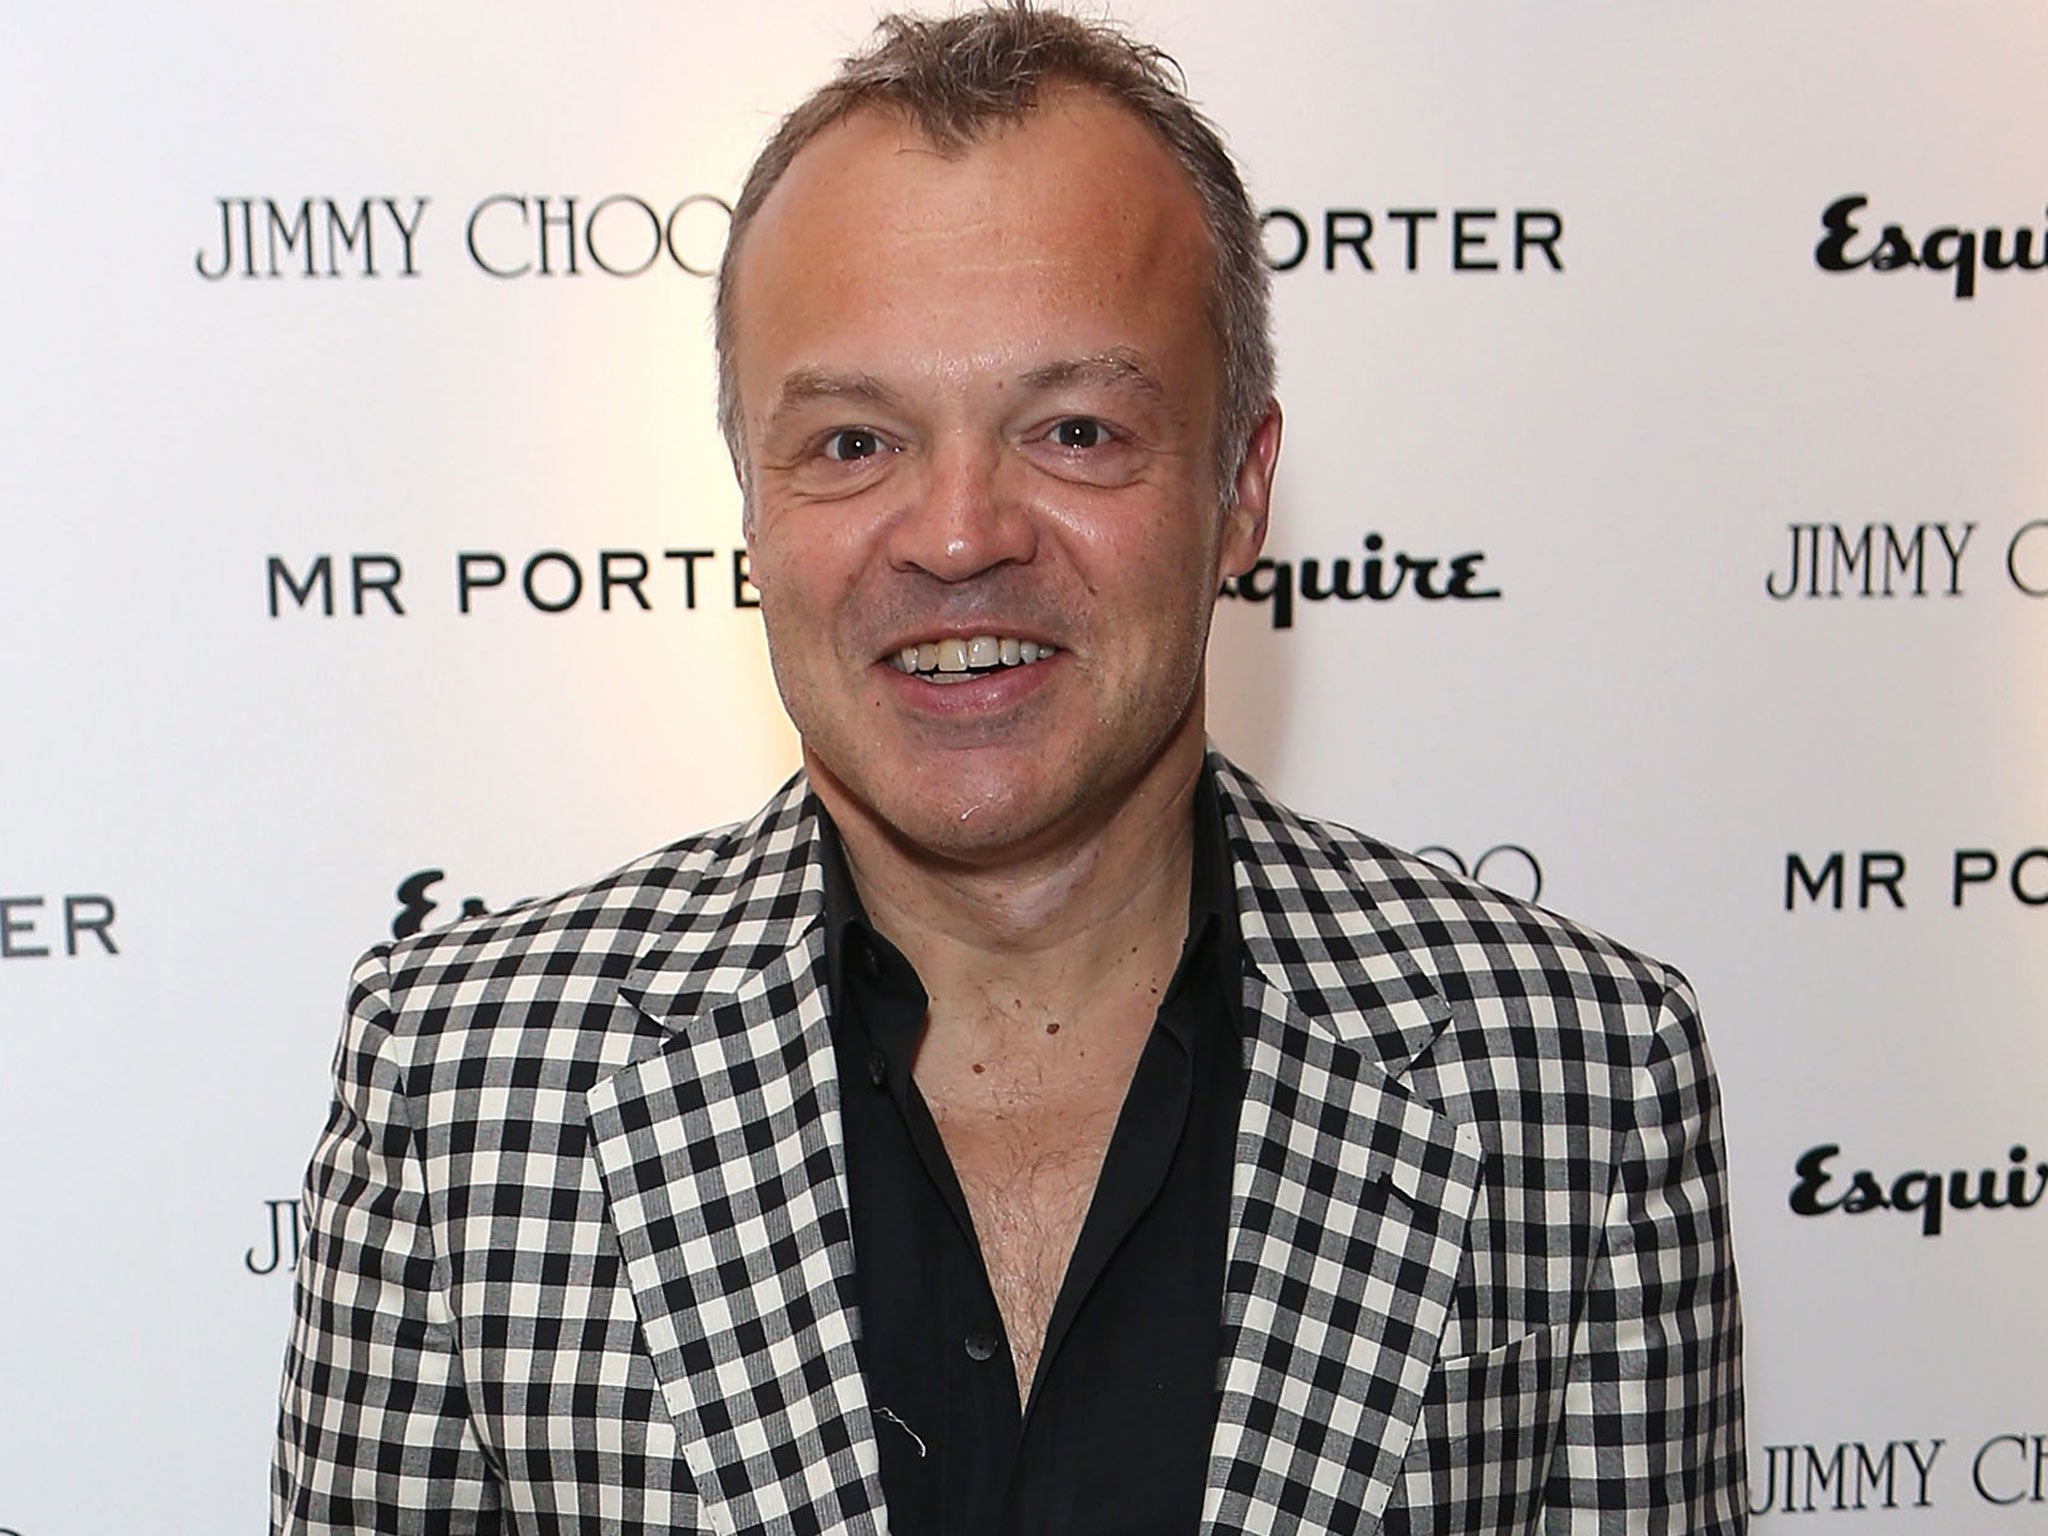 Graham Norton has attacked the huge severance payments made to former BBC executives